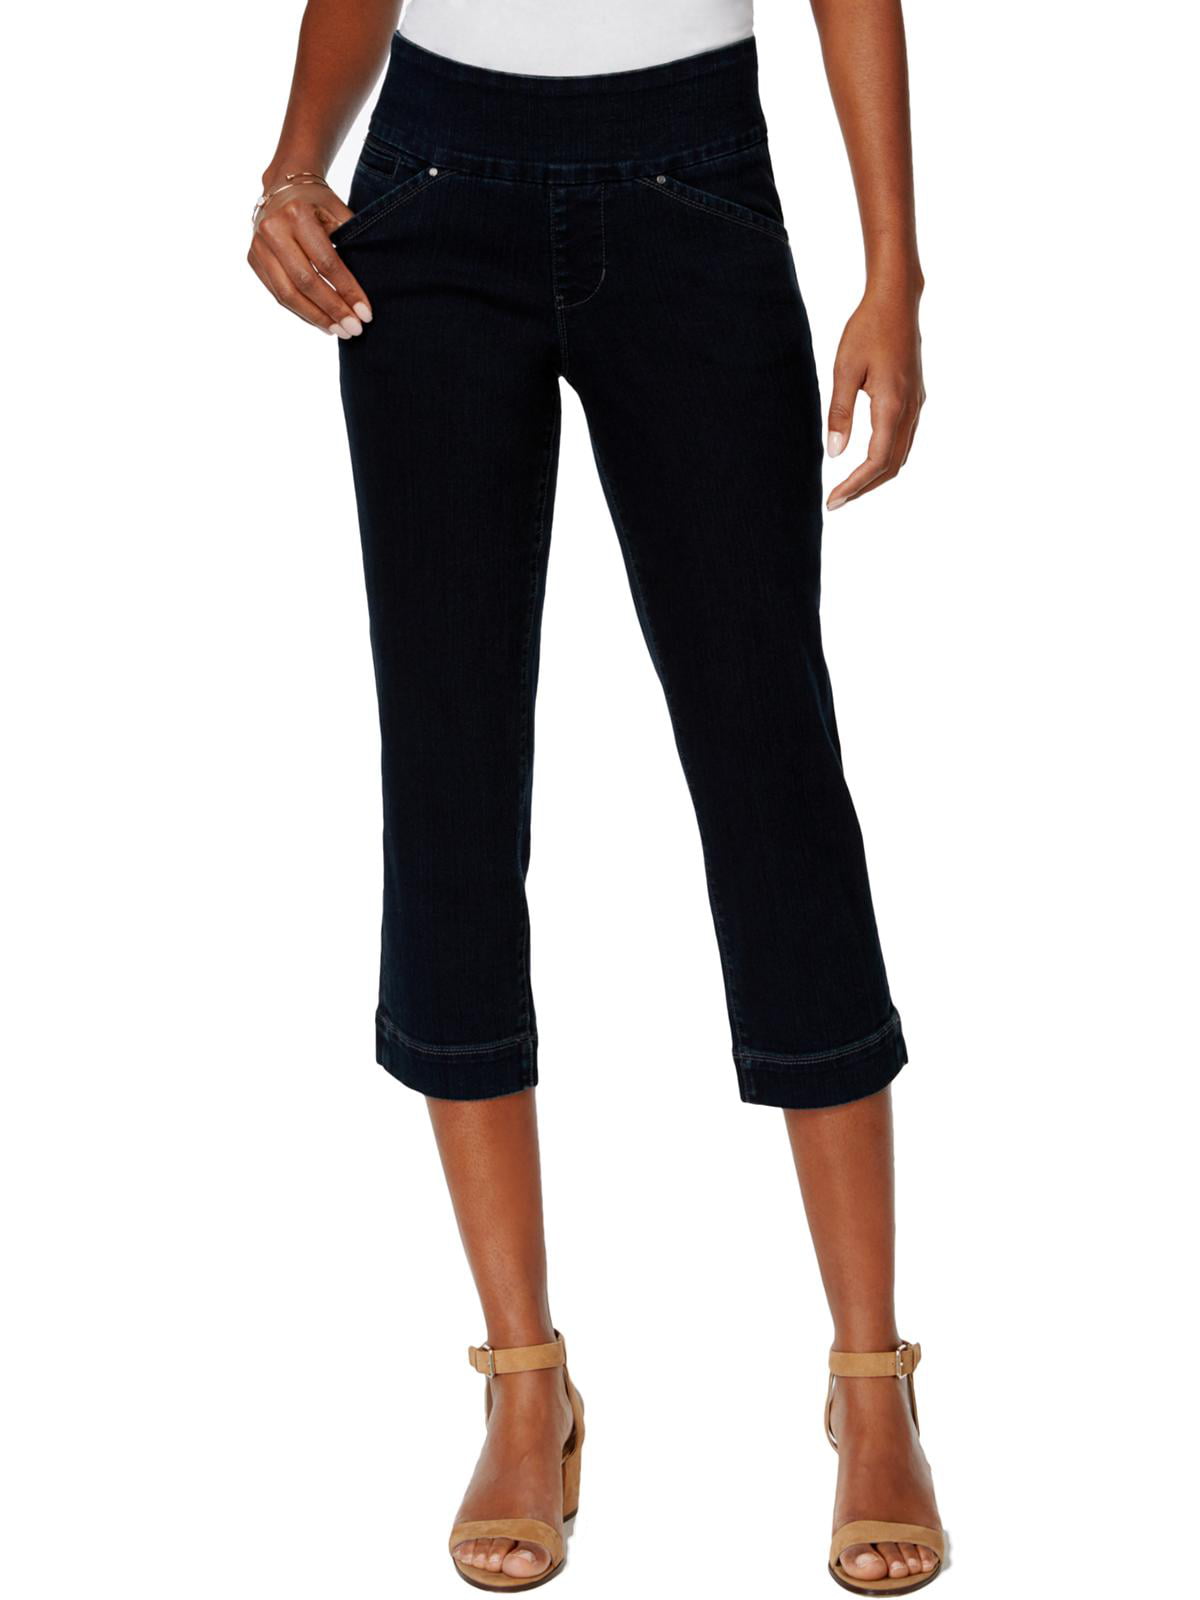 JAG Jeans - Jag Jeans Womens Petites Classic Fit Mid-Rise Cropped Jeans ...